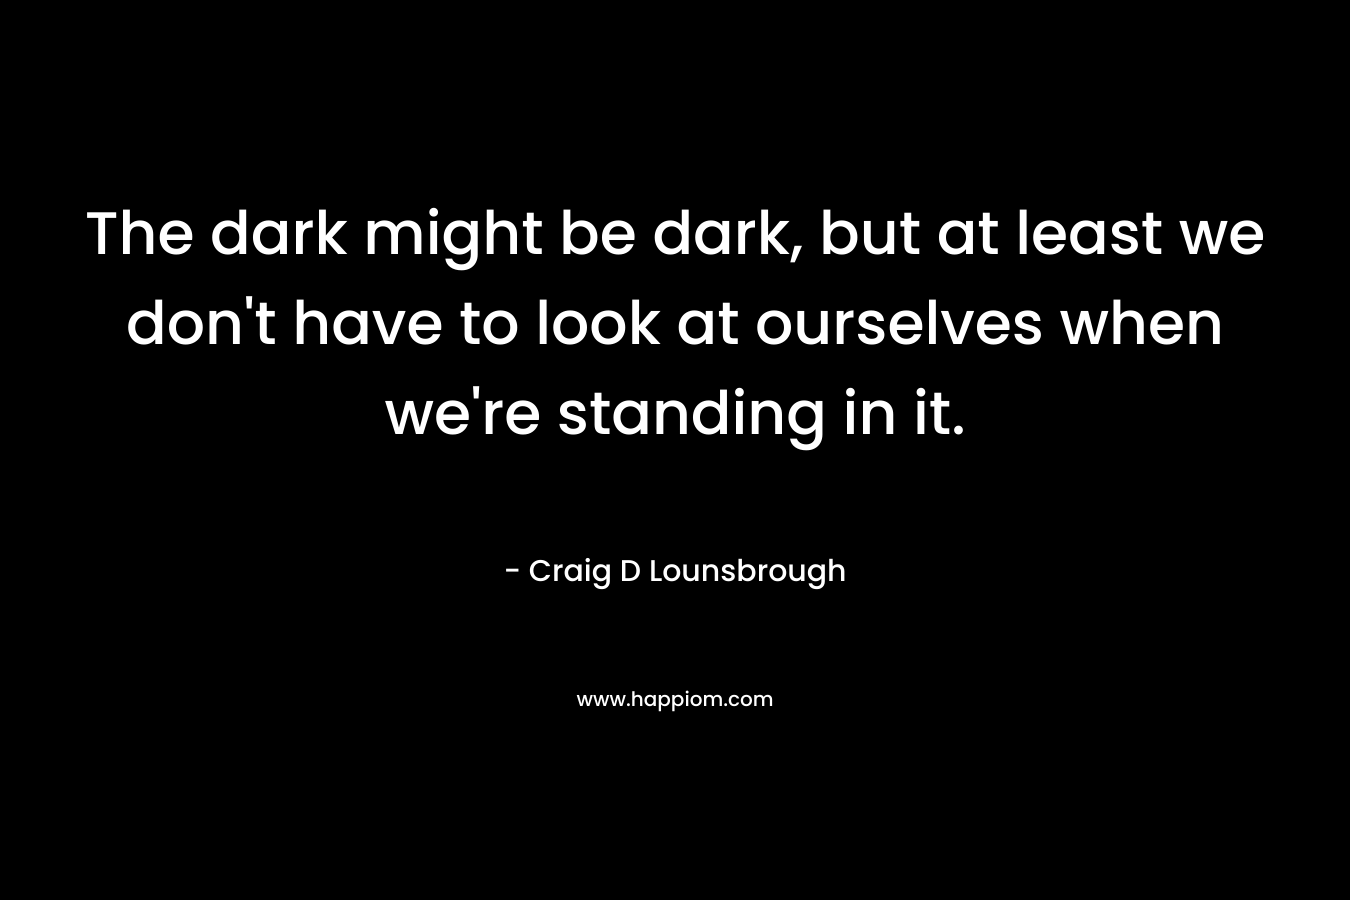 The dark might be dark, but at least we don't have to look at ourselves when we're standing in it.